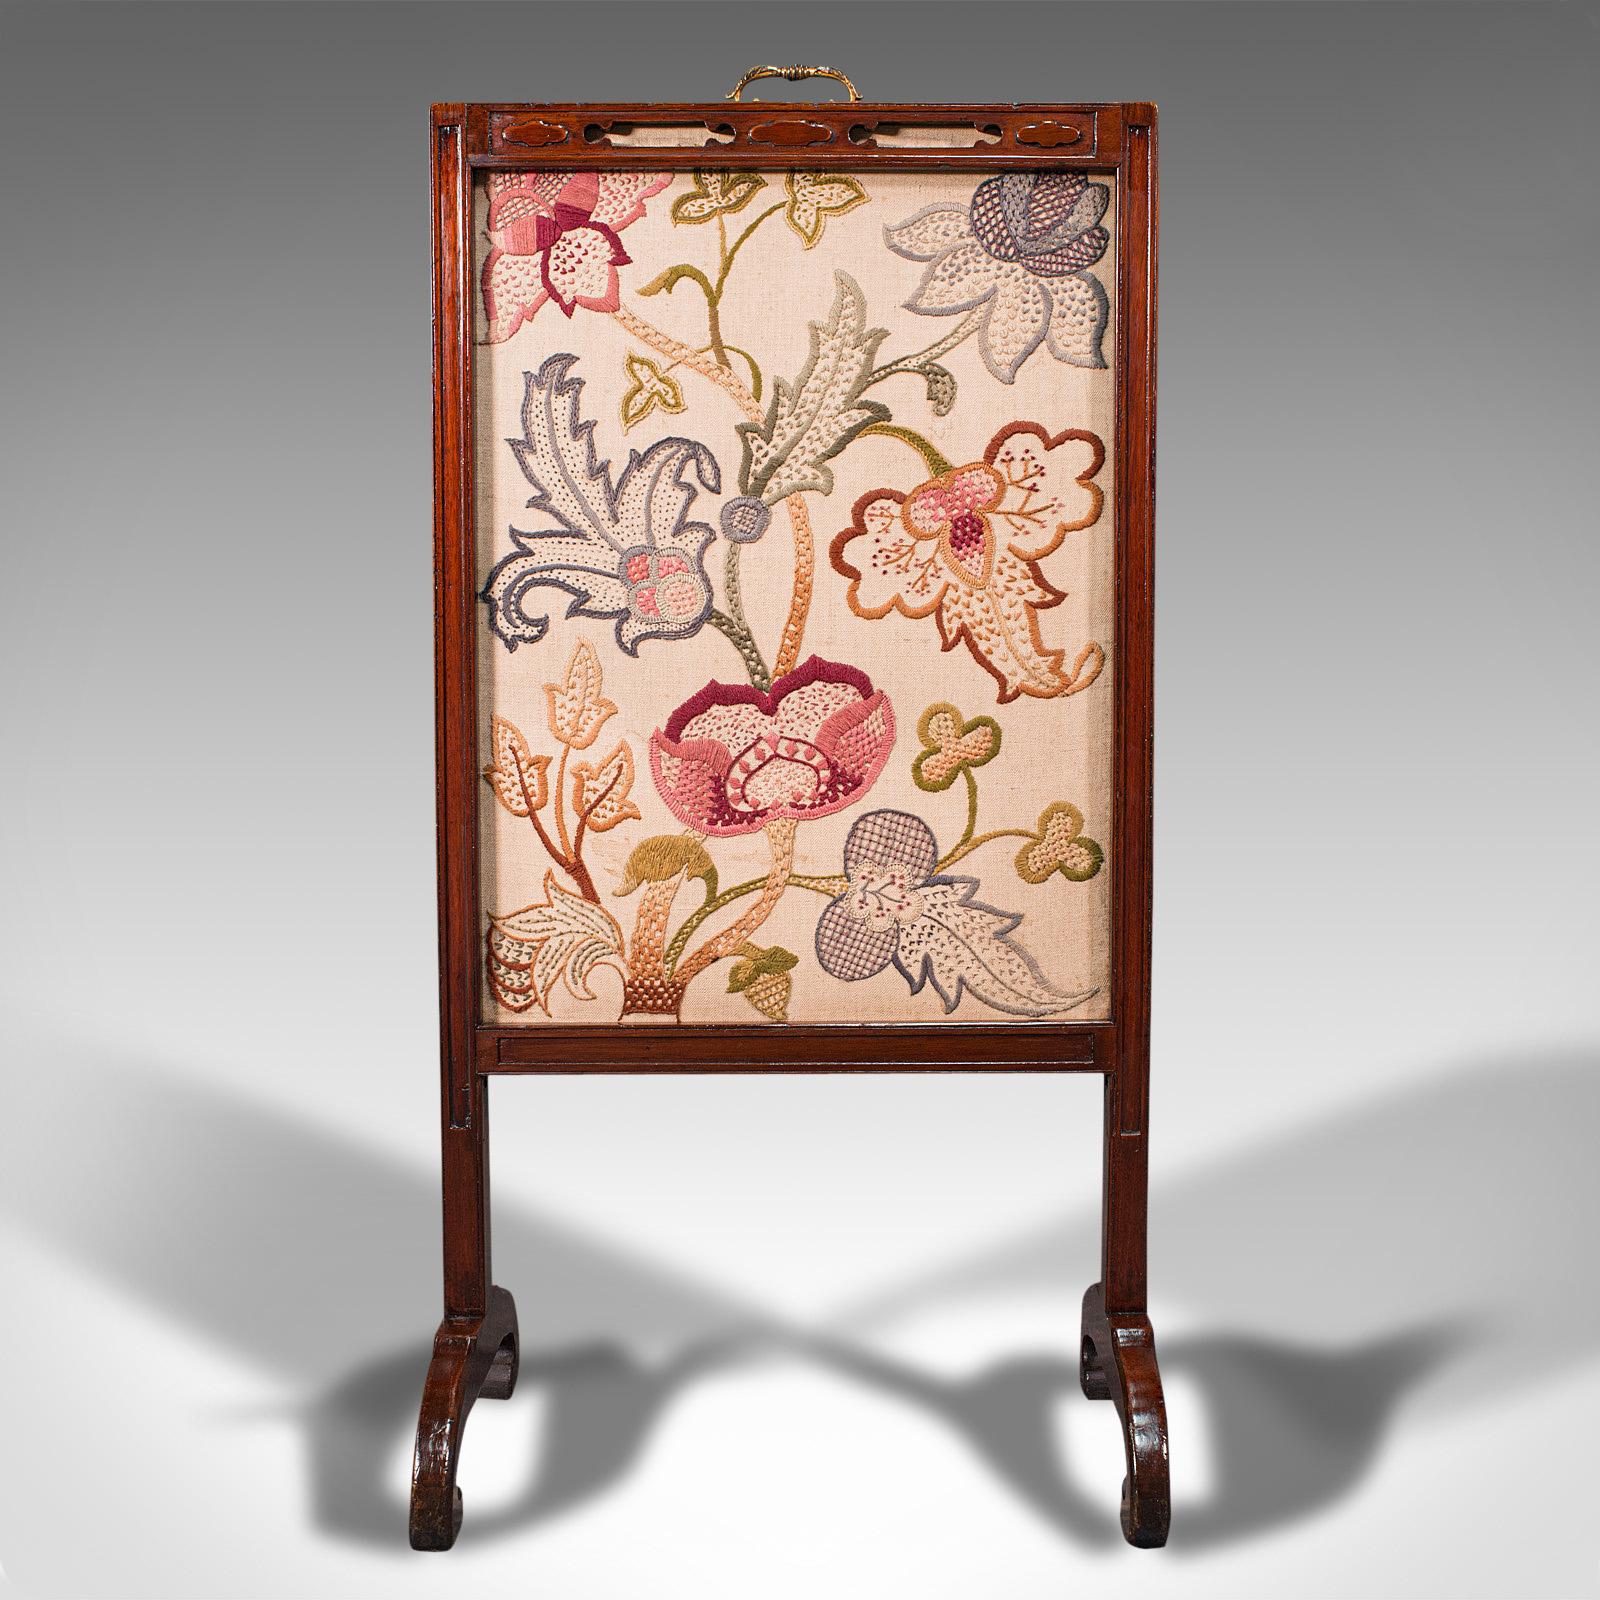 This is an antique needlepoint fire screen. An English, mahogany fireside guard with tapestry screen, dating to the Regency period, circa 1830.

Attractive fire screen with Chinese Chippendale overtones
Displaying a desirable aged patina and in